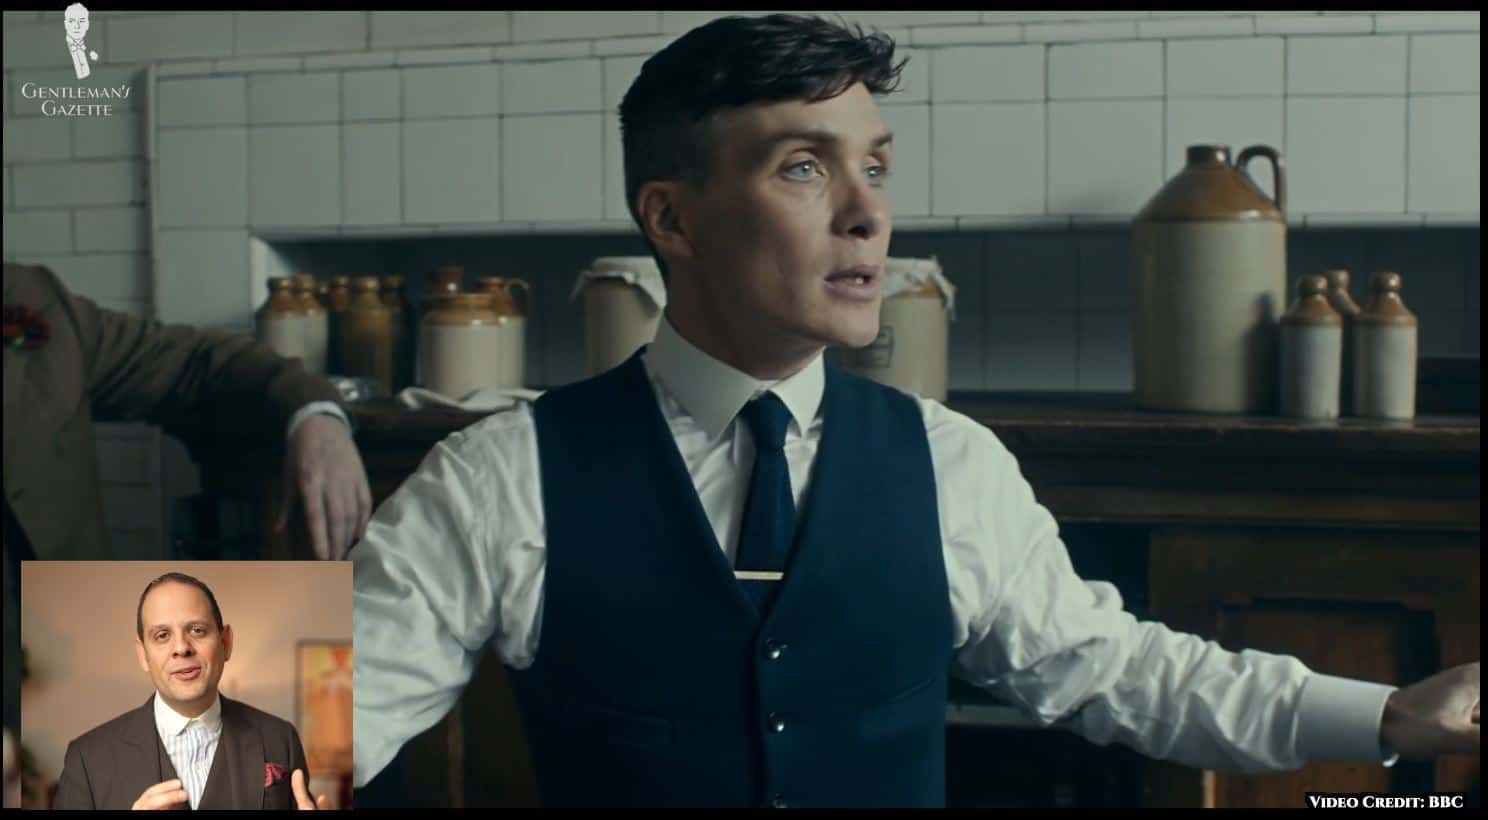 Tommy Shelby’s tie bar is intentionally attached to the tie so high up [Image Credit: BBC]